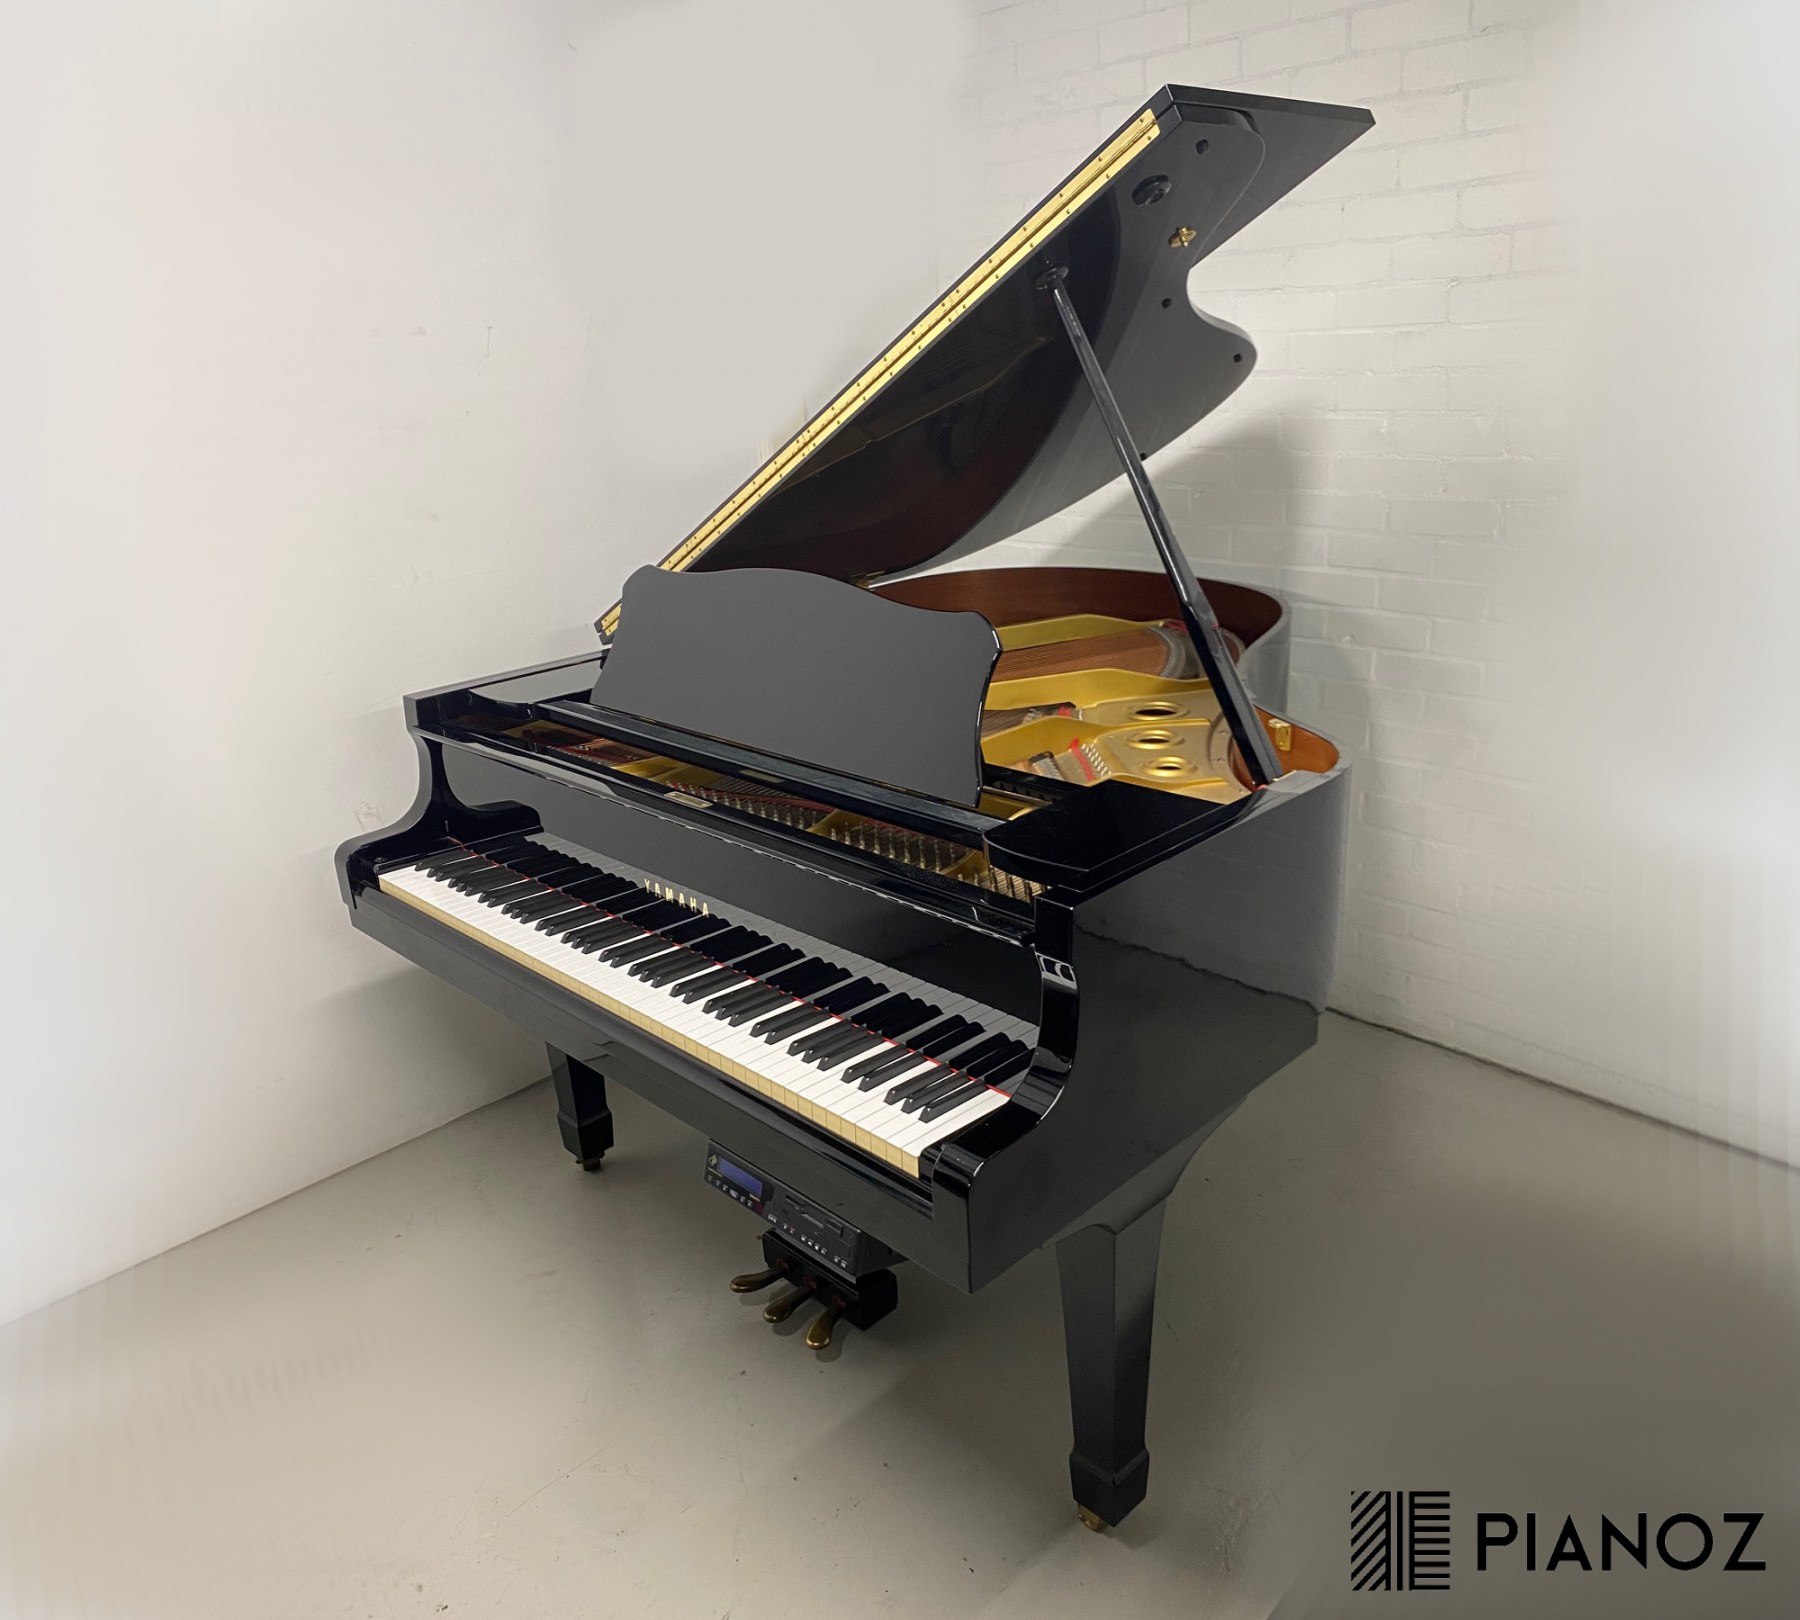 Yamaha G2 Pianodisc Grand Piano piano for sale in UK